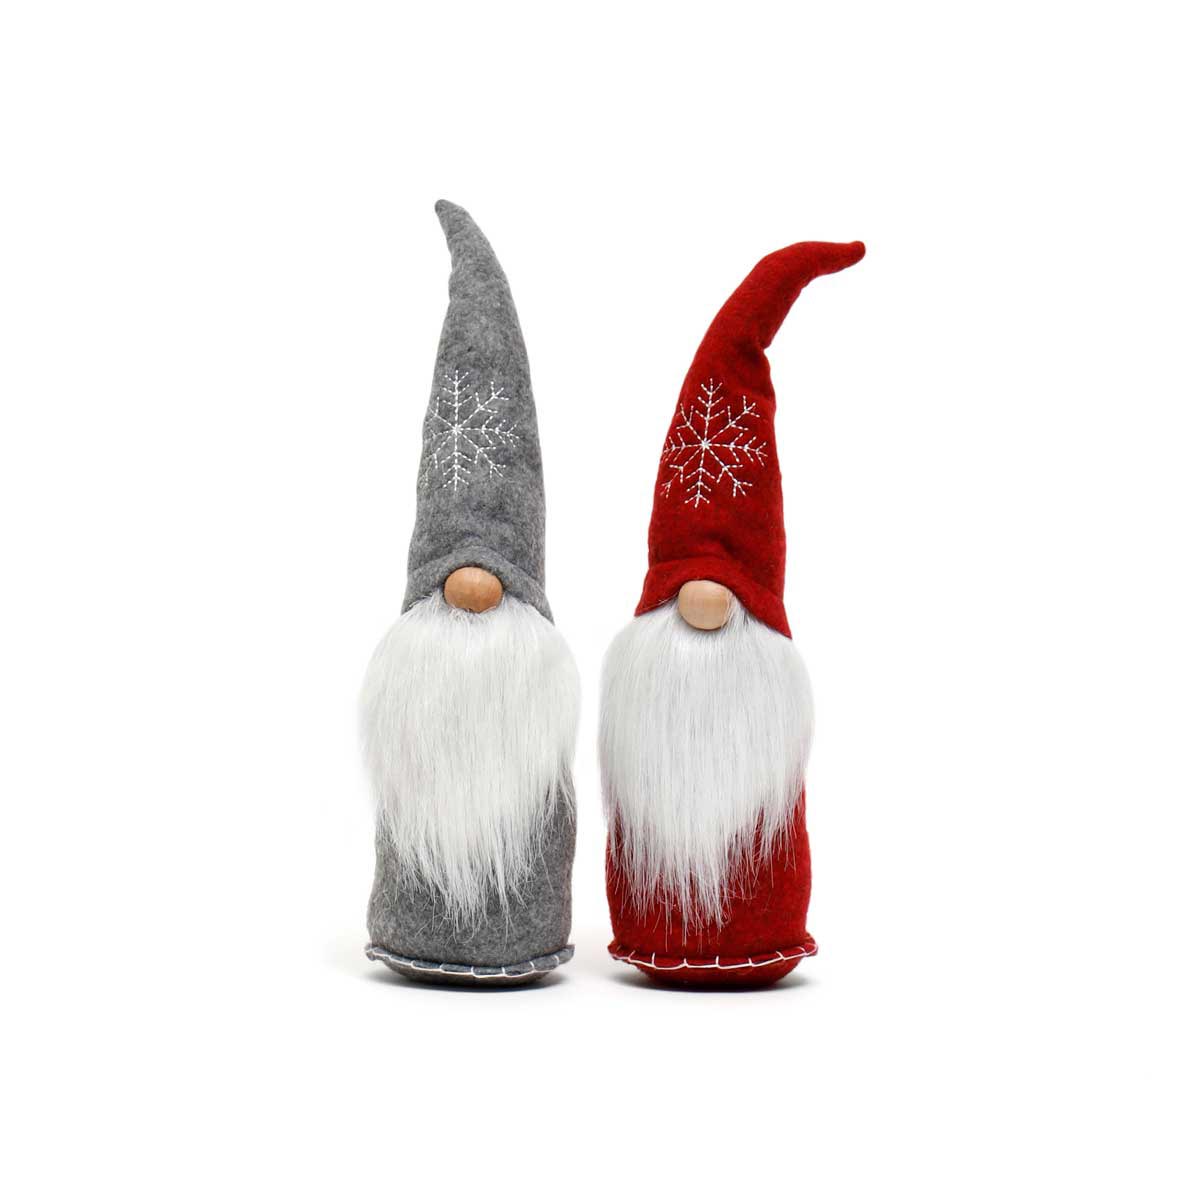 SCHNITZEL GNOME WITH SNOWFLAKE HAT, WOOD NOSE, CURLY BEARD AND H